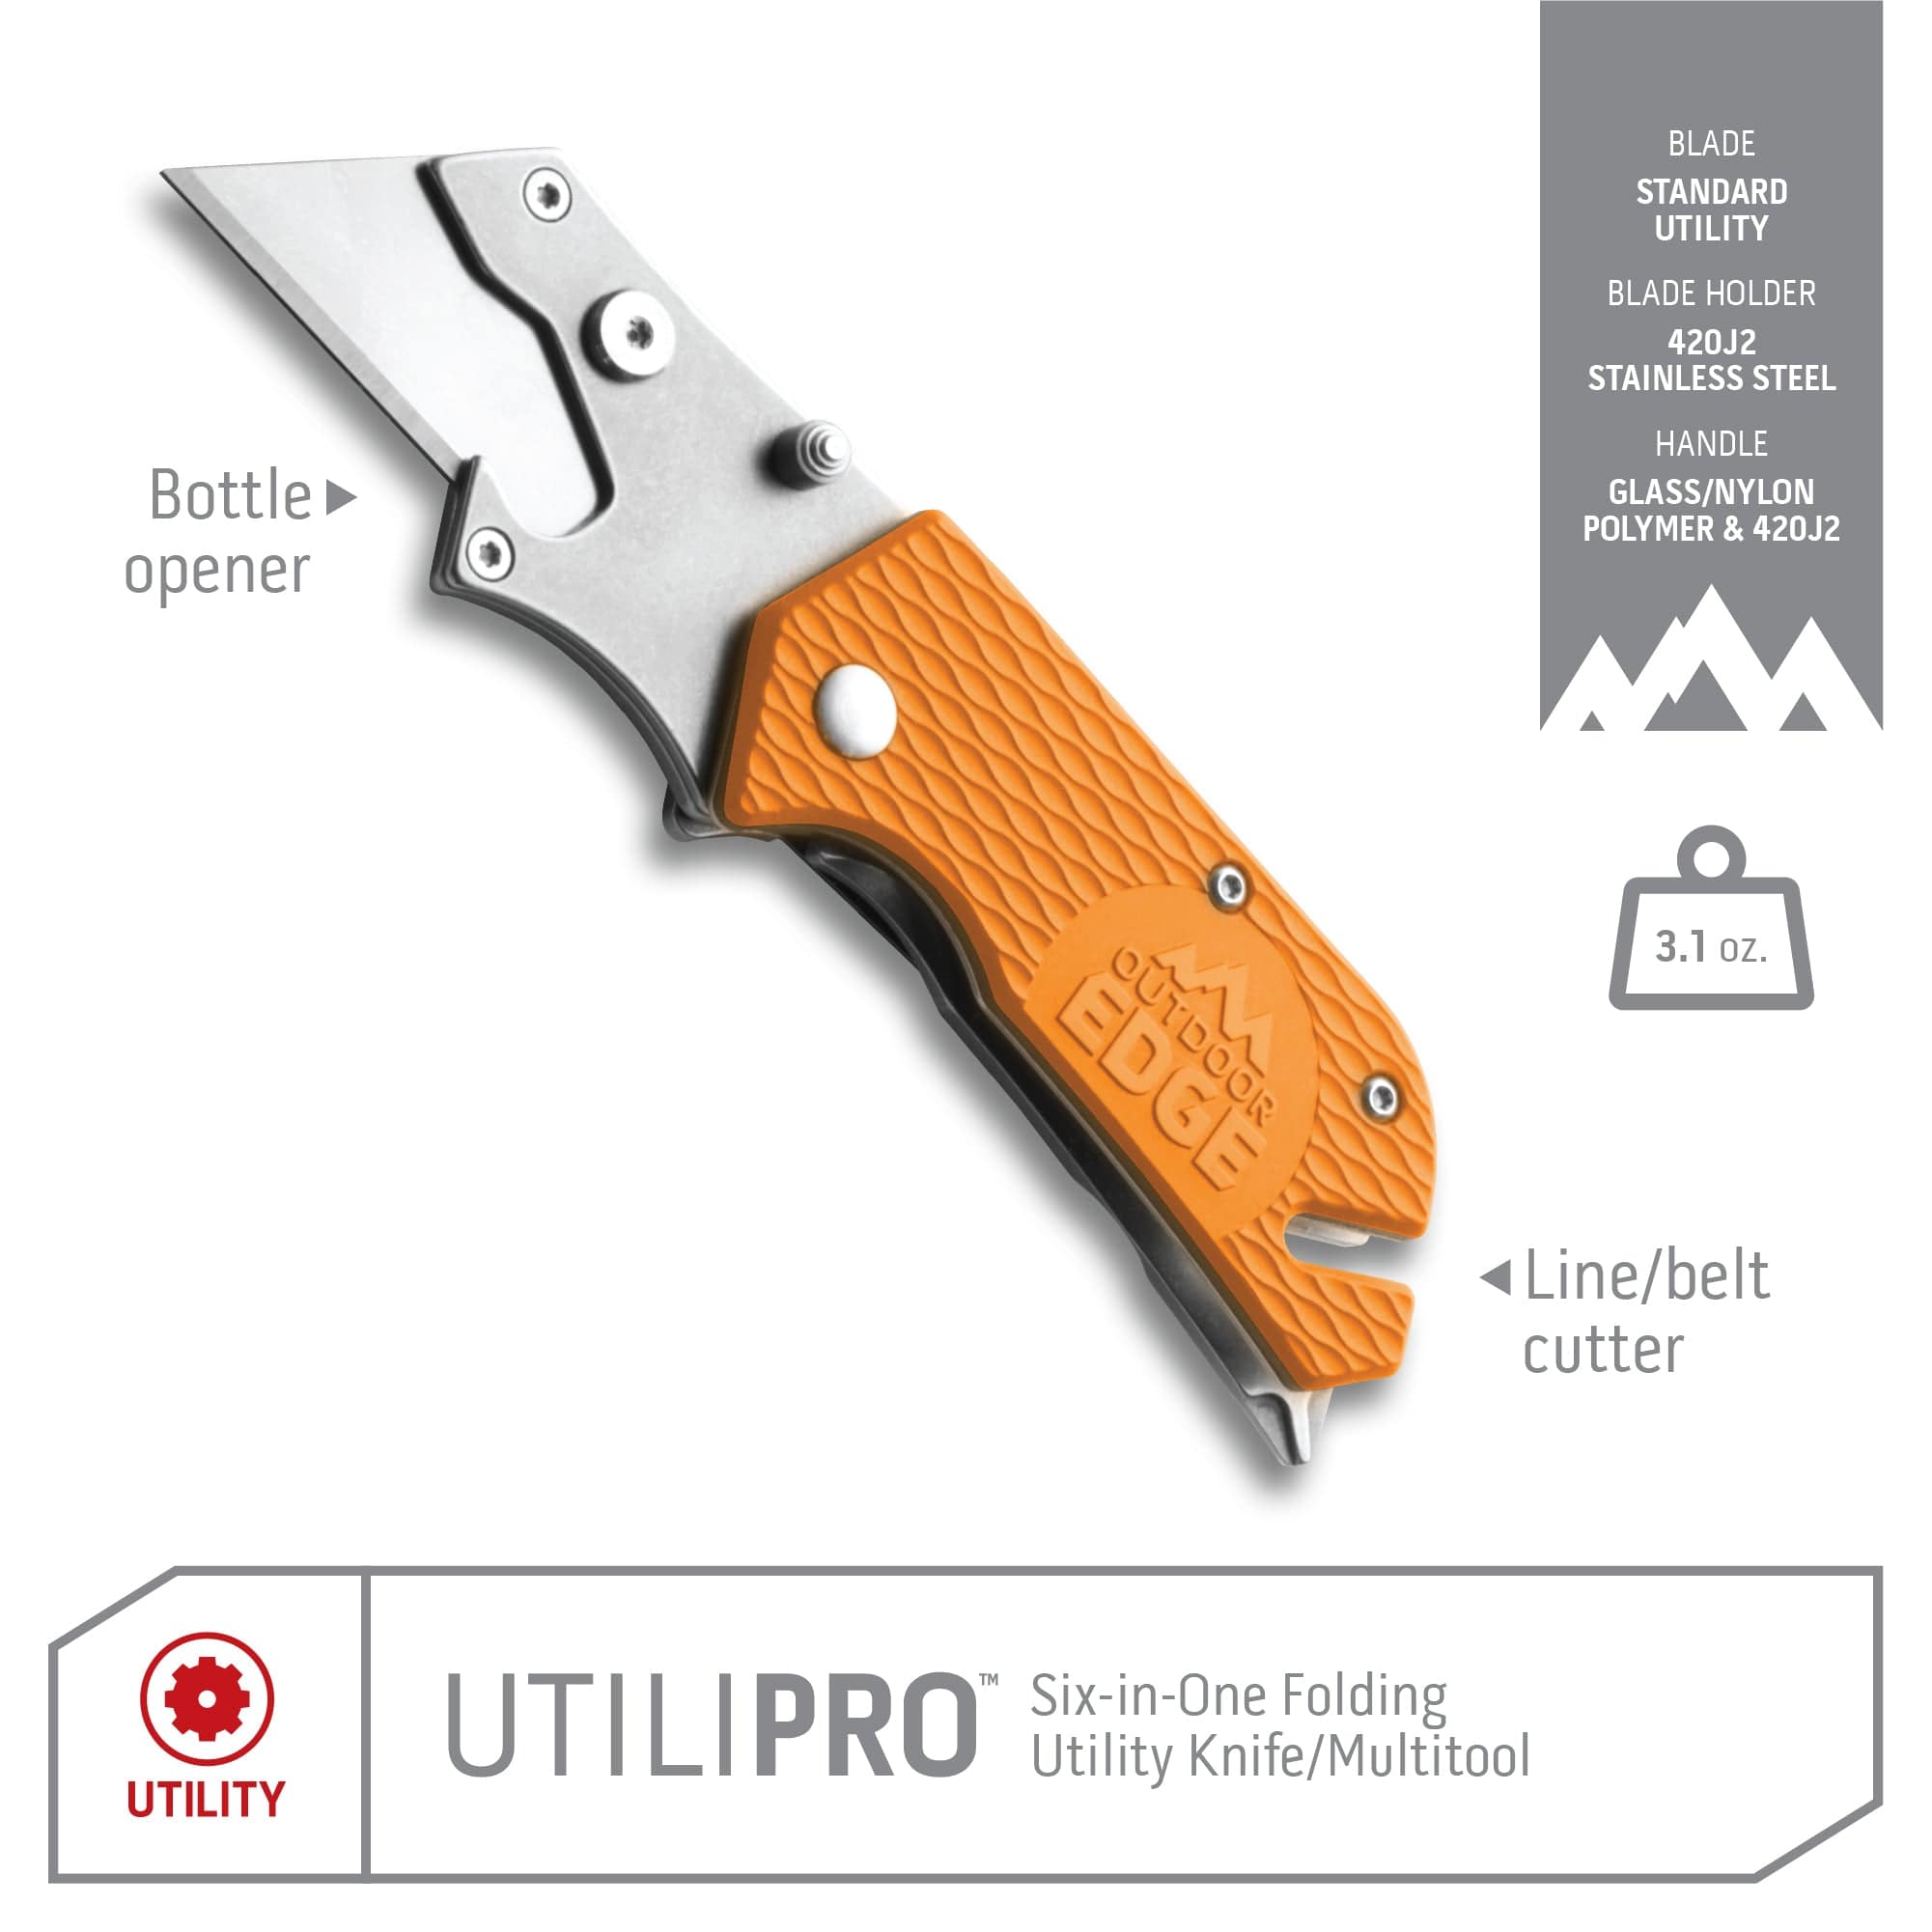 Outdoor Edge UtiliPro Orange Utility Knife/Multi Tool Product Photo with callouts for bottle opener and line/belt cutter.